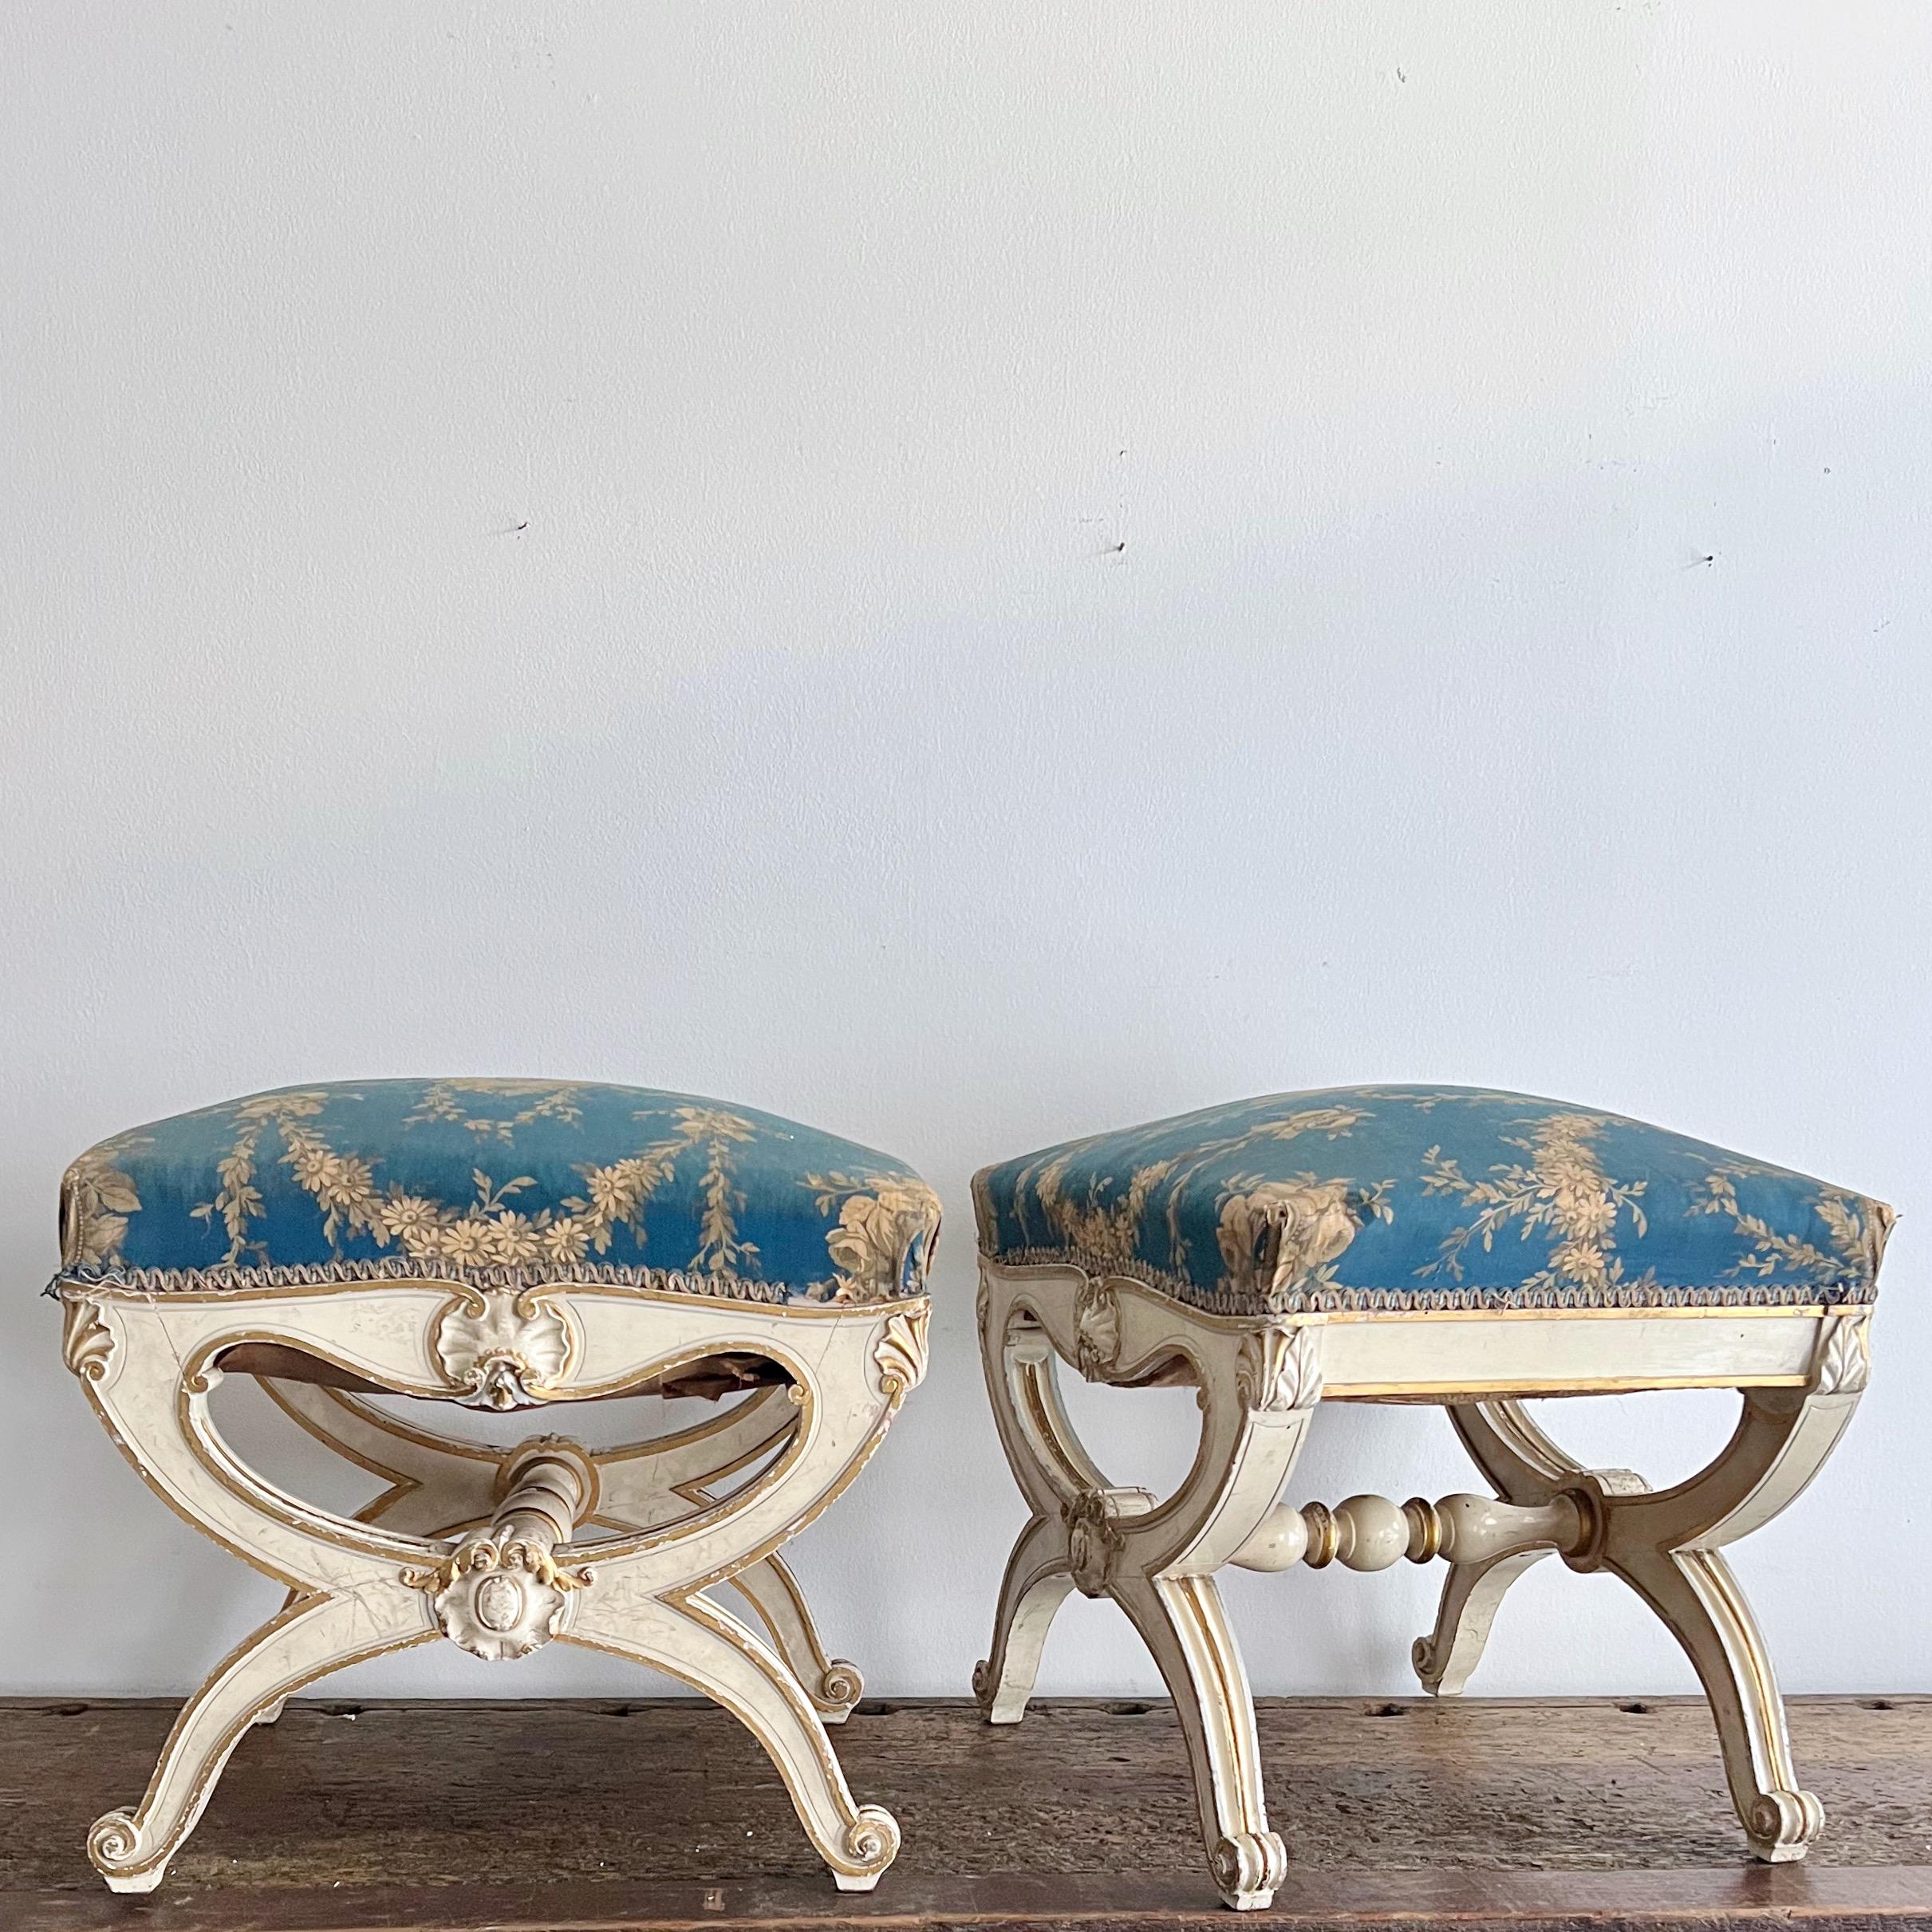 Pair of 19th century Italian painted and gilt wood curule stools with richly carved medallions, resting on scrolled feet with cross stretchers. 
Uphlostered in original timeworn Italian fabric. 